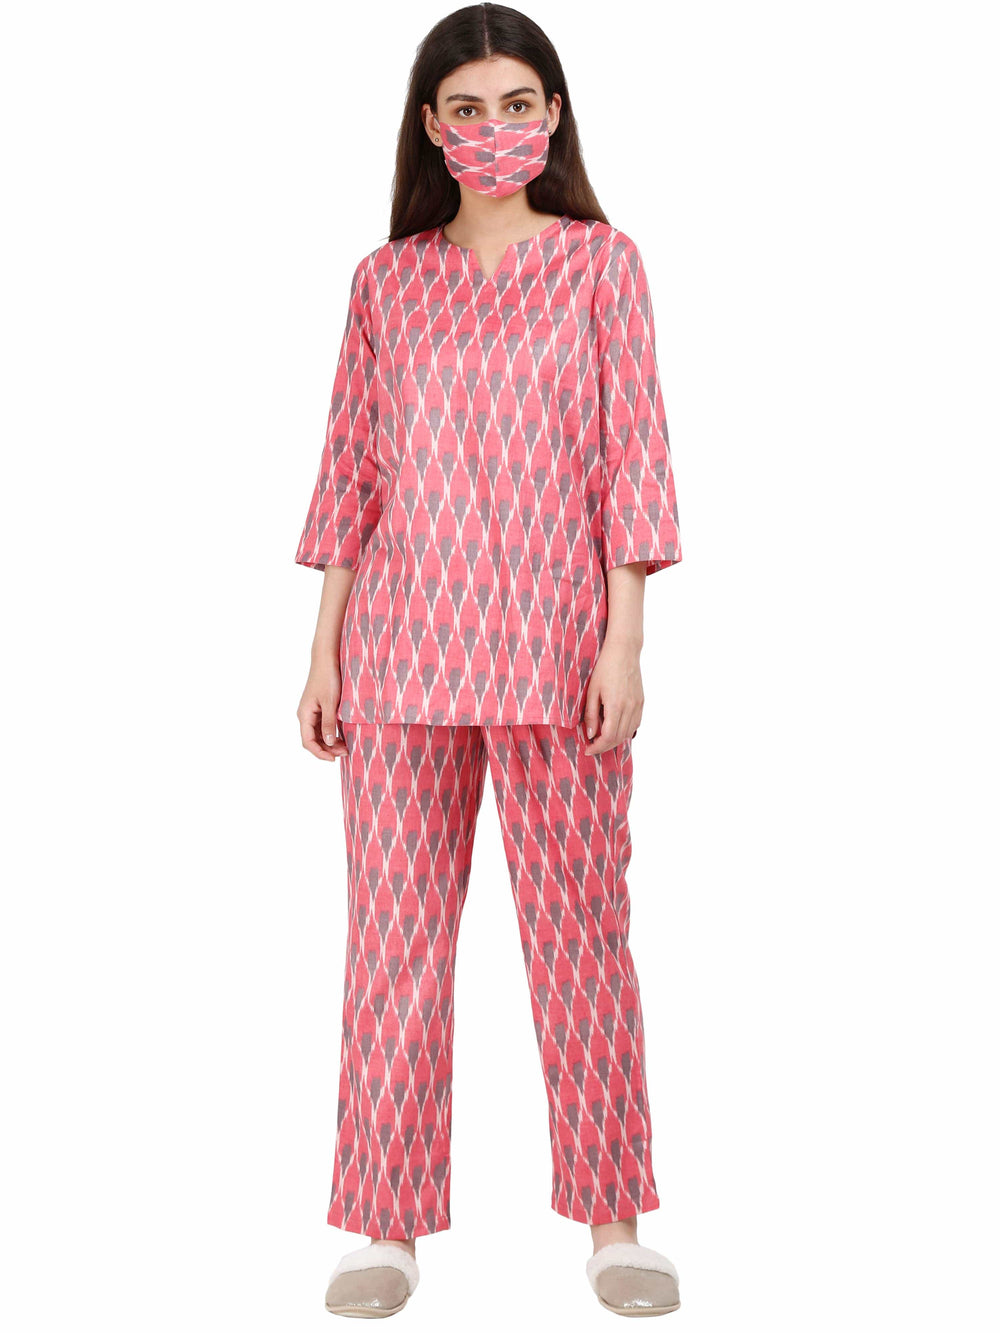  Co-ord sets  Shop stylish pink co ord sets women Online in india- 9shines label 